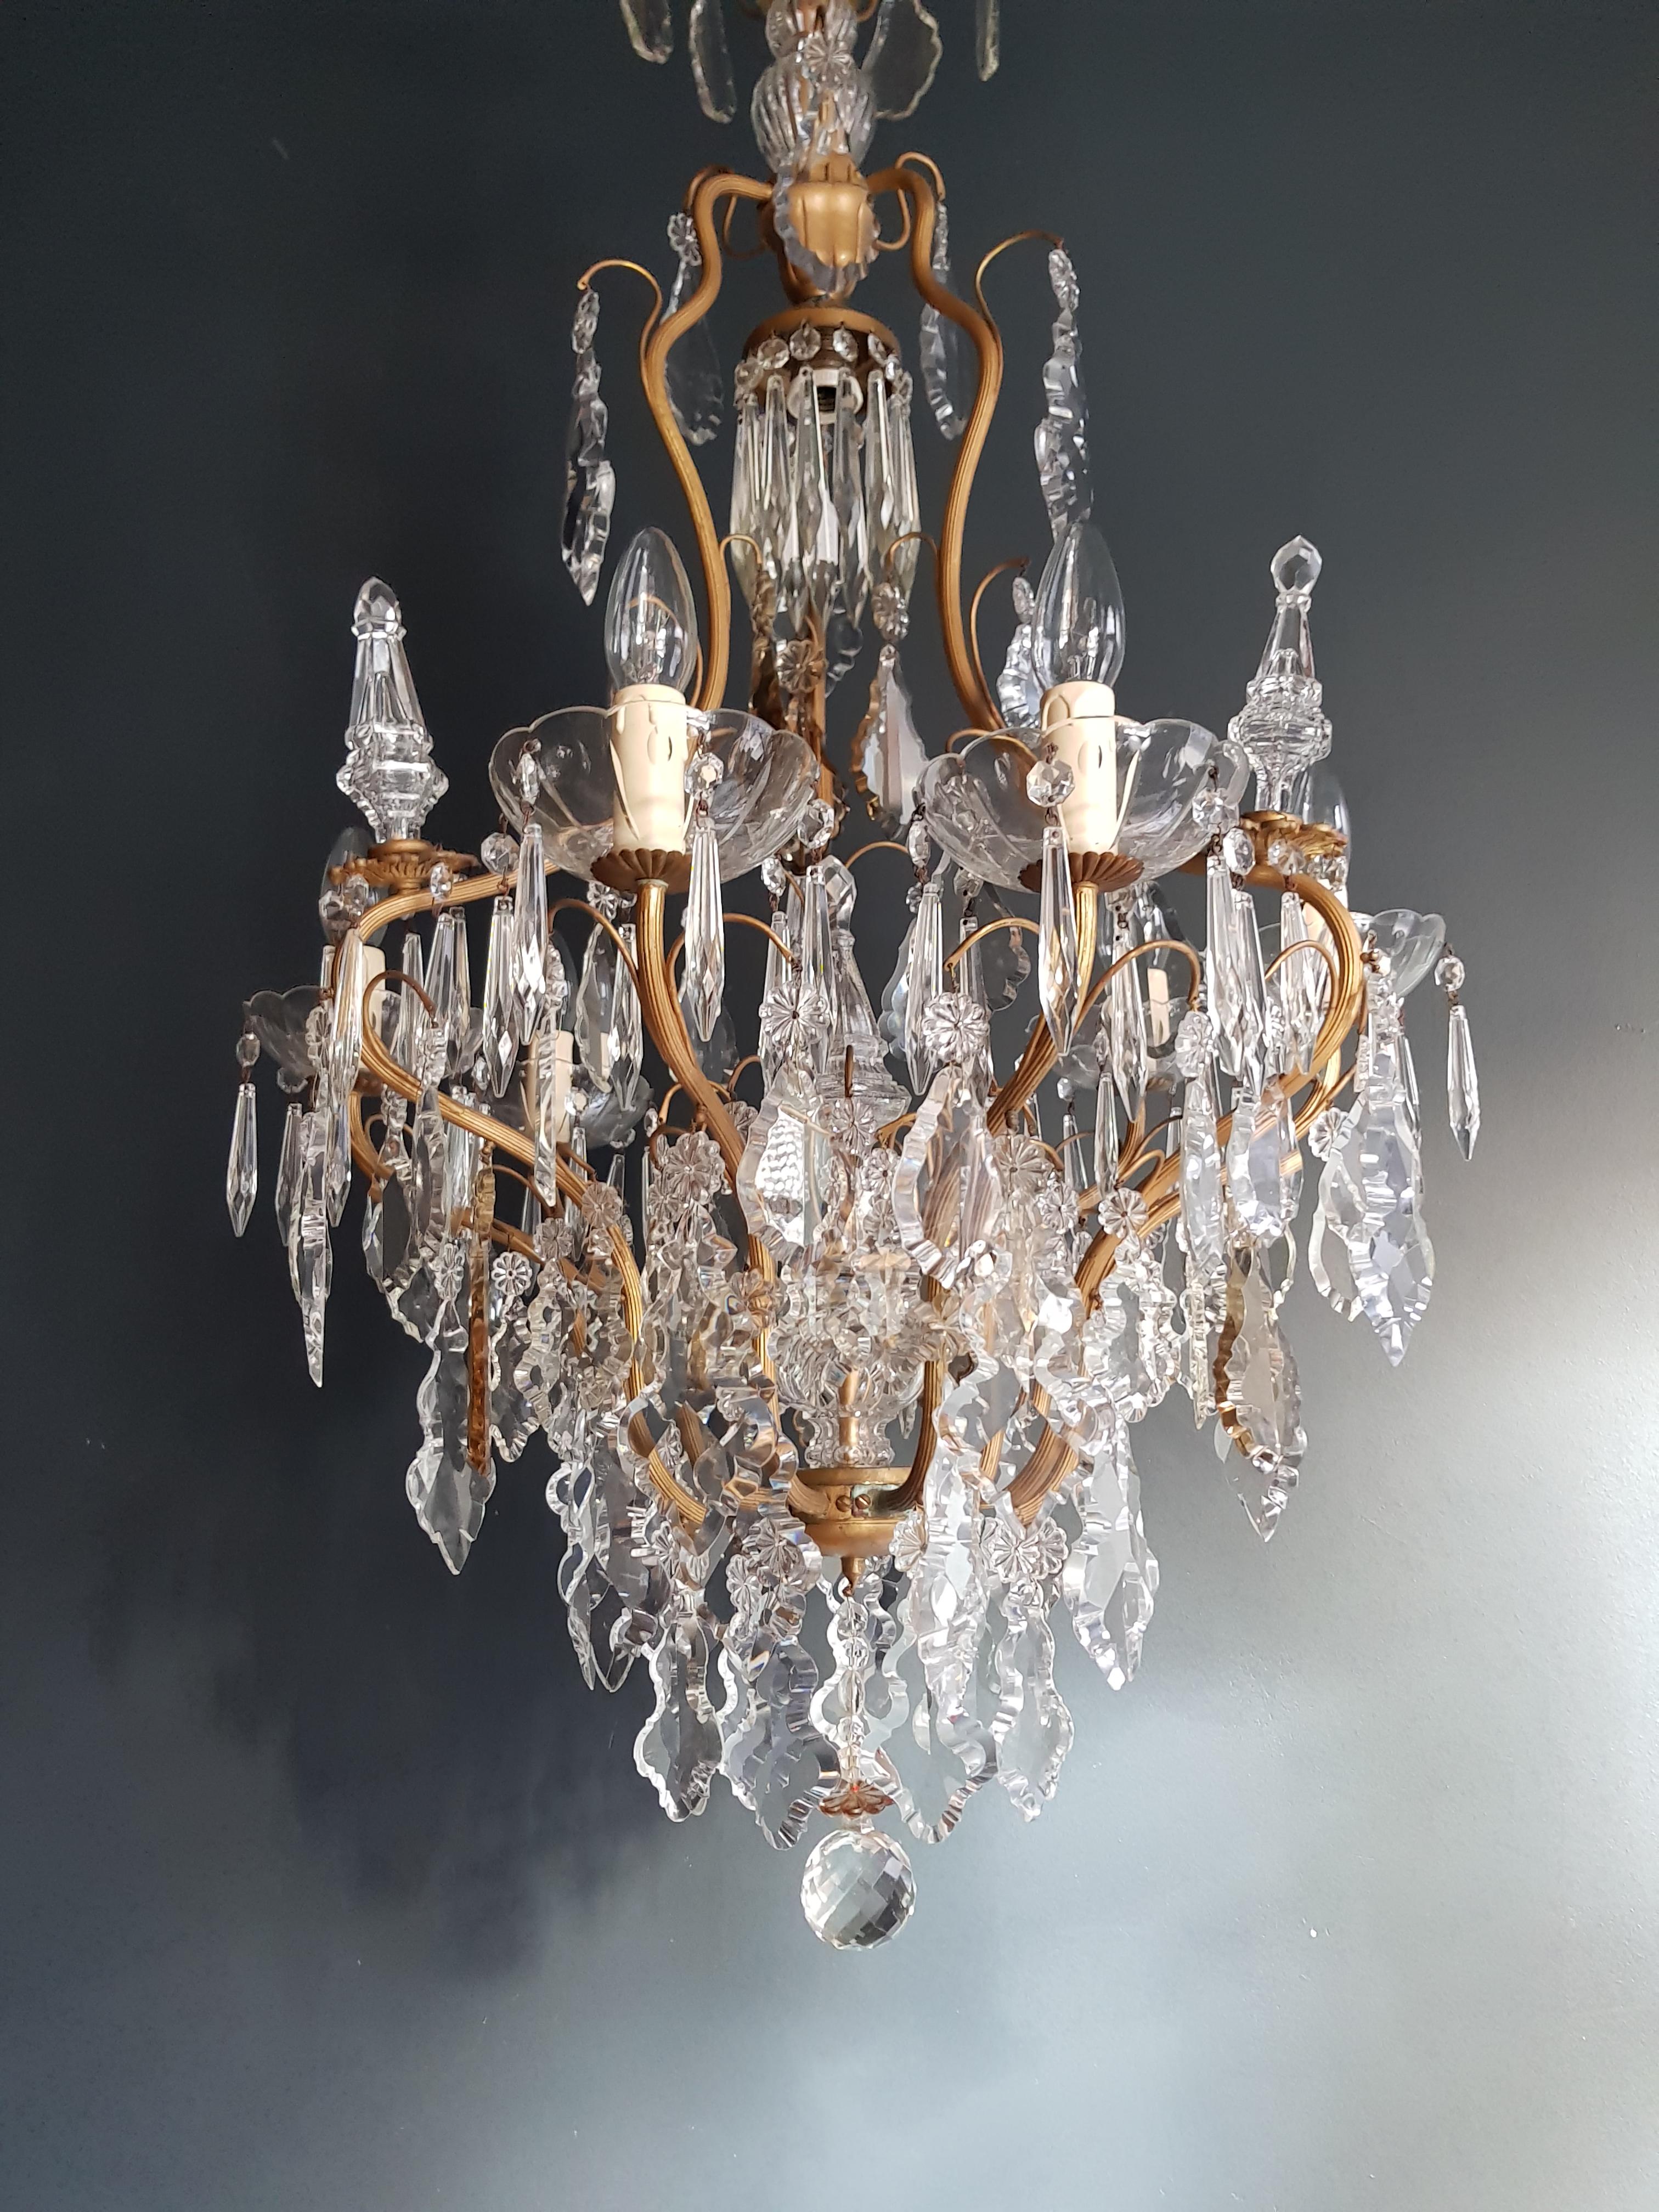 French Crystal Chandelier - Antique Ceiling Lamp Radiating Art Nouveau Elegance

Presenting a remarkable French crystal chandelier, an embodiment of opulence from the Art Nouveau era, meticulously restored with care and devotion in Berlin.

Expertly